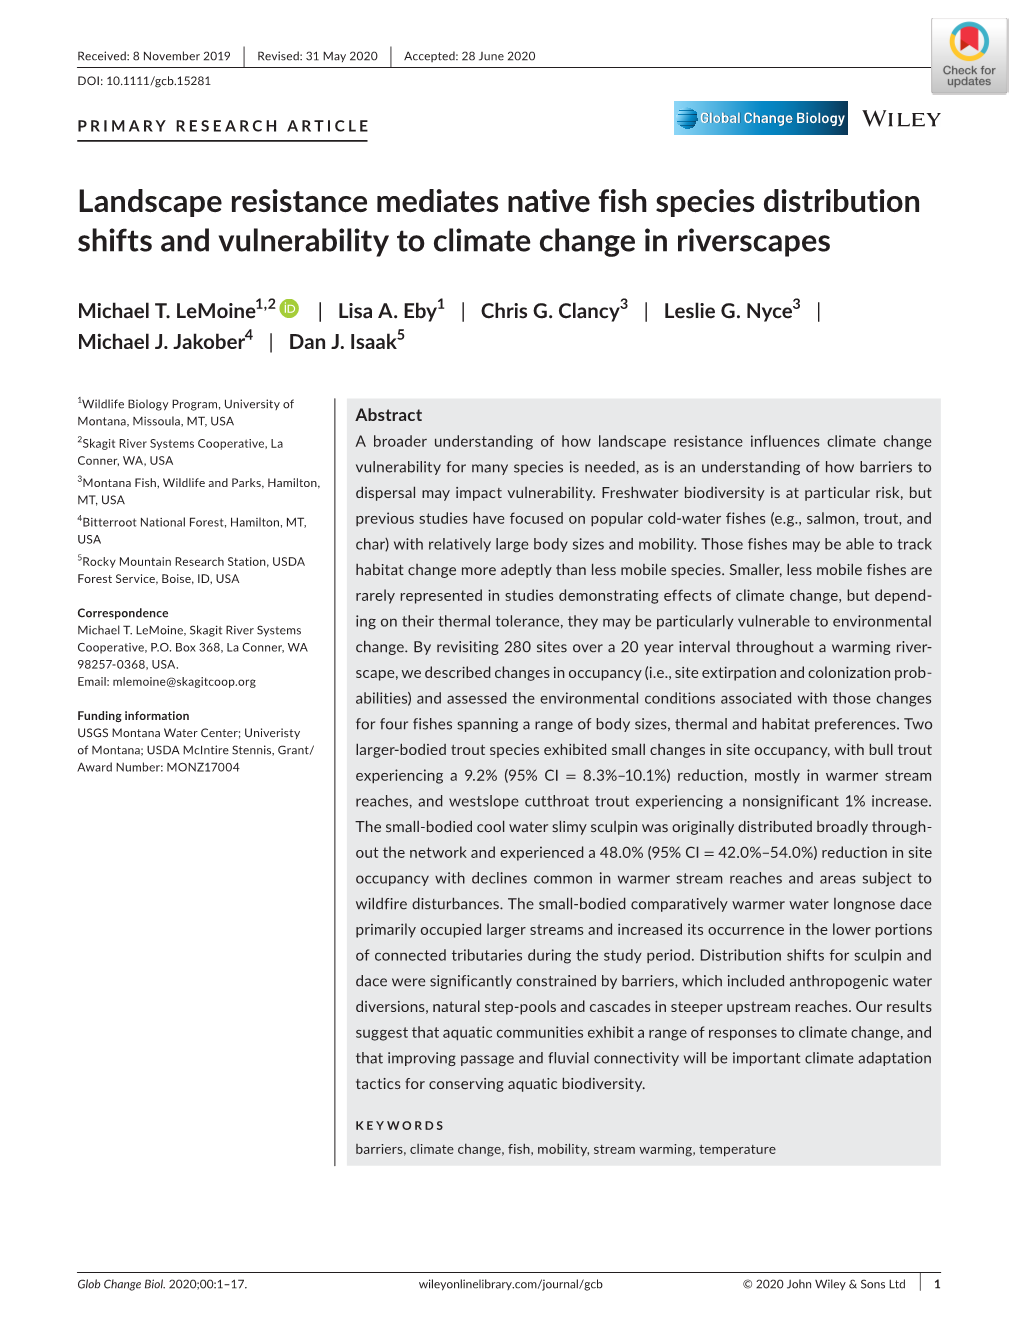 Landscape Resistance Mediates Native Fish Species Distribution Shifts and Vulnerability to Climate Change in Riverscapes